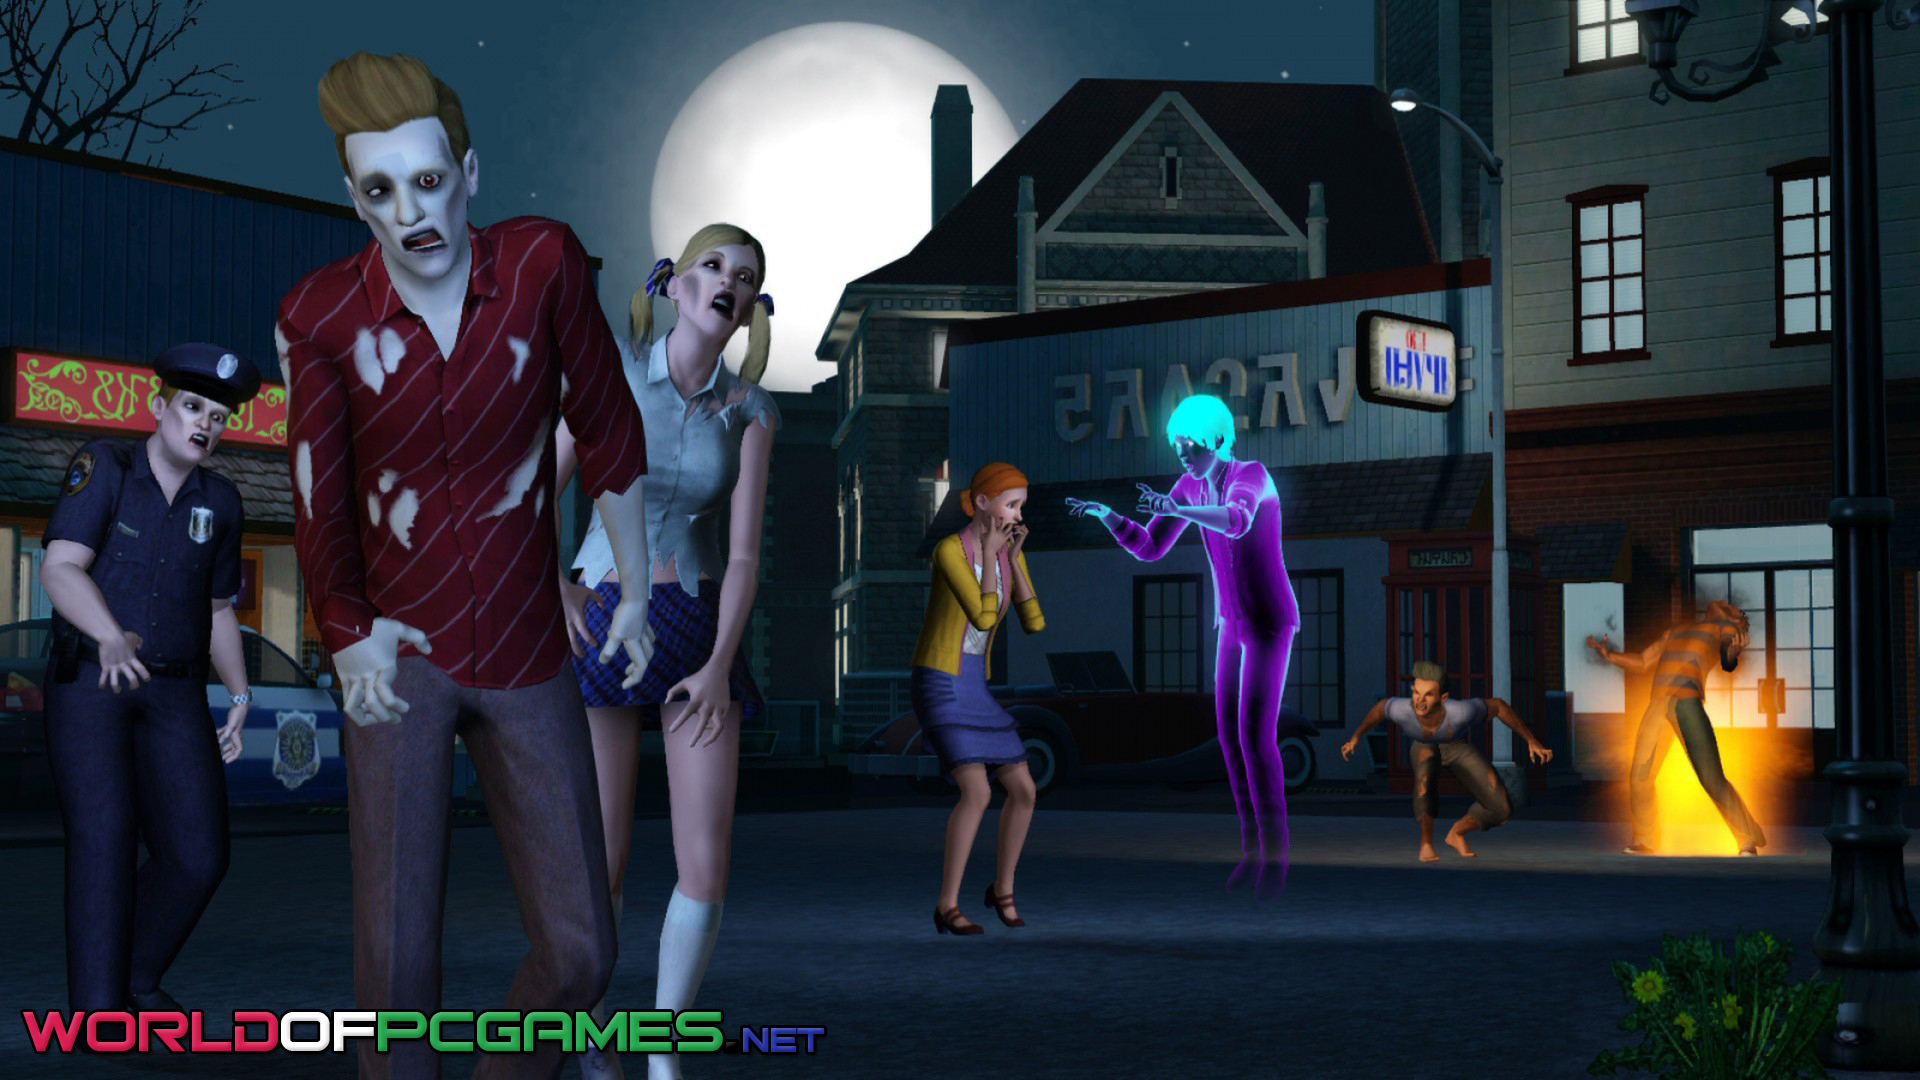 The Sims 3 Free Download PC Game By worldof-pcgames.netm